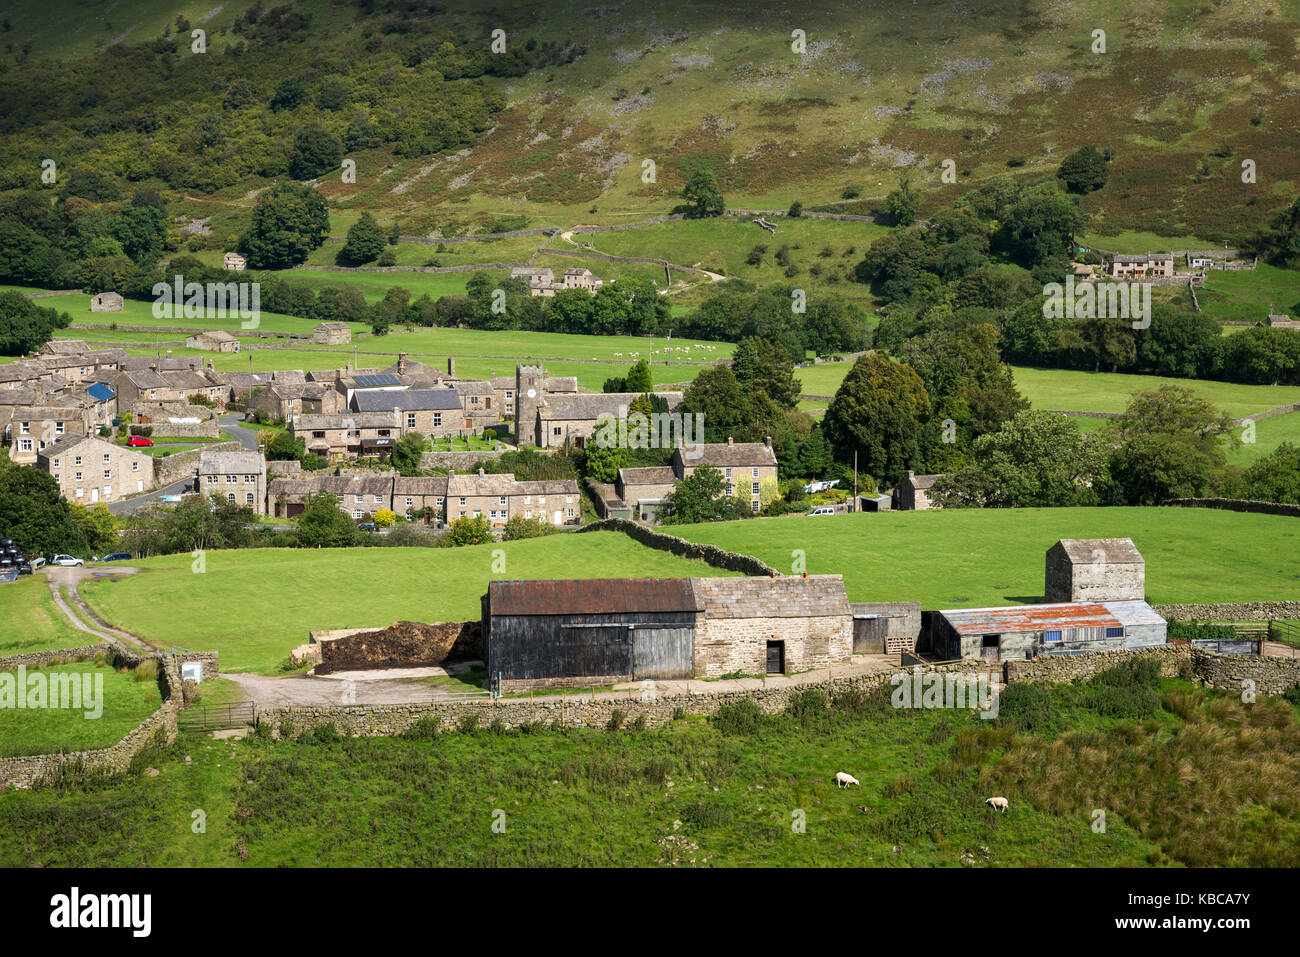 The beautiful village of Muker in Swaledale, Yorkshire Dales, England. Stock Photo